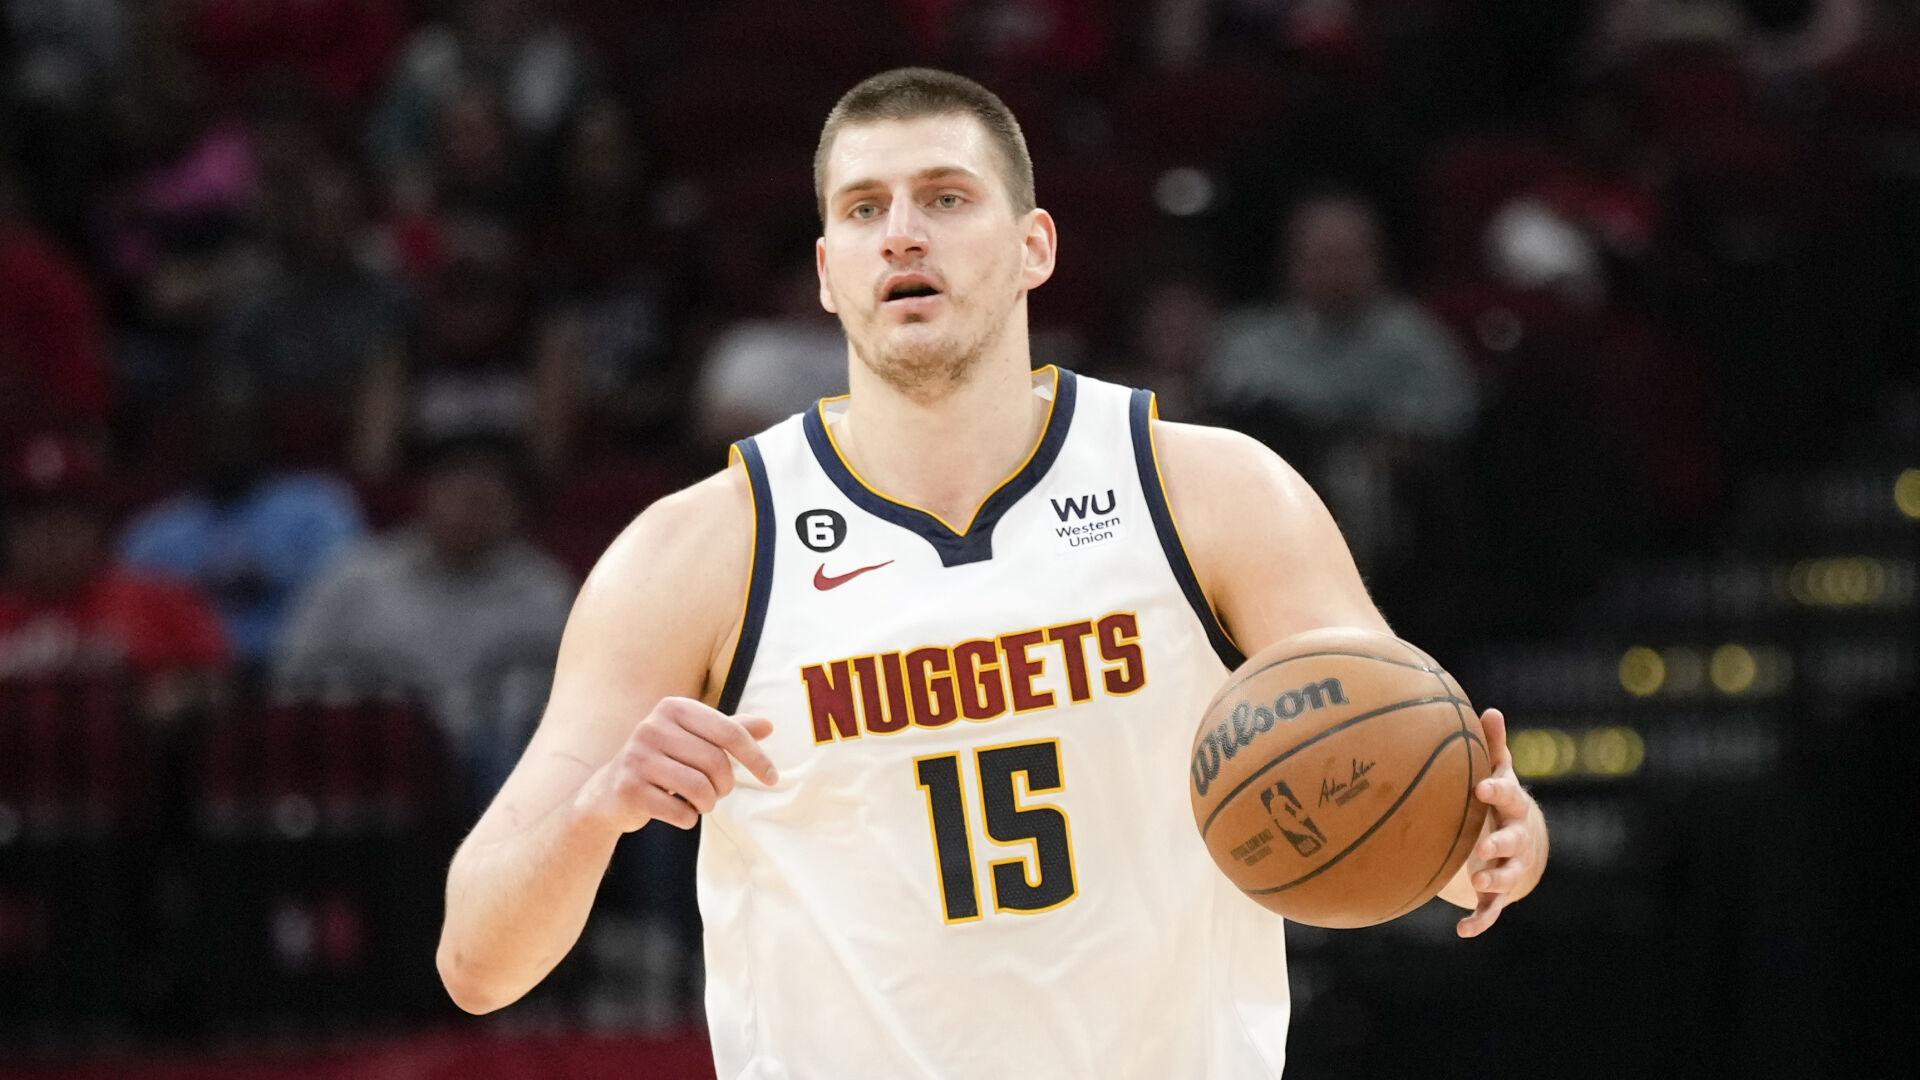 Nuggets get helping hand from Majerus – The Denver Post